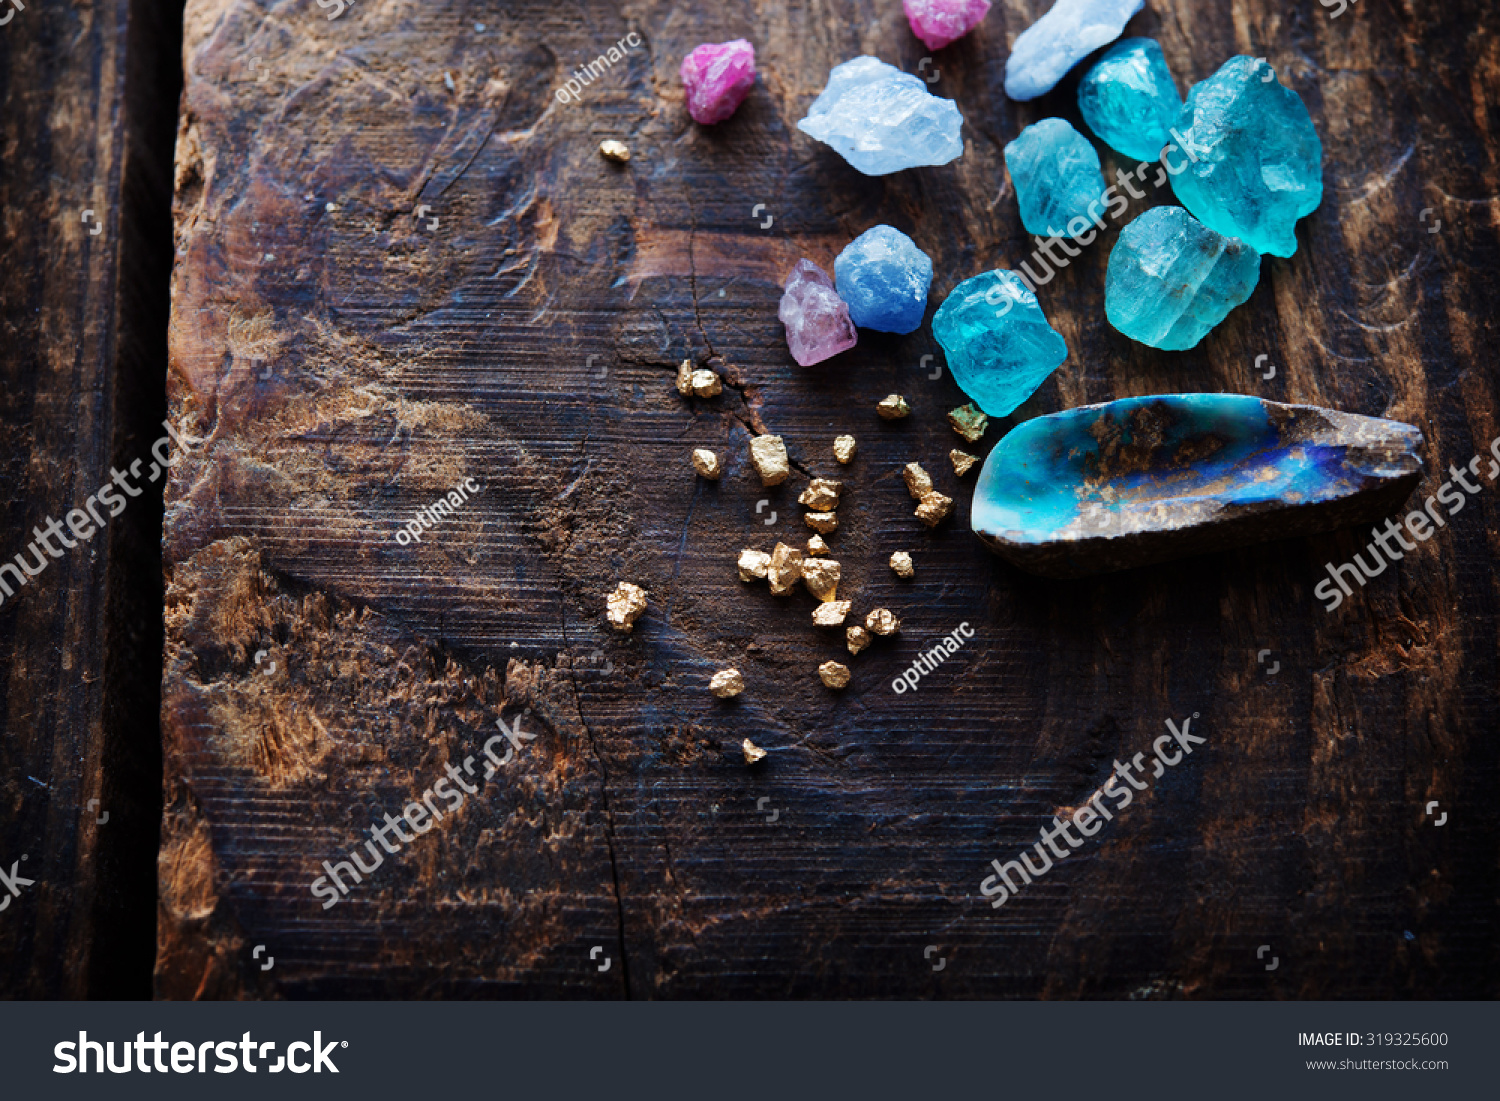 Treasure hunting. Mining for gems. Gold and gems on rough wooden surface. #319325600